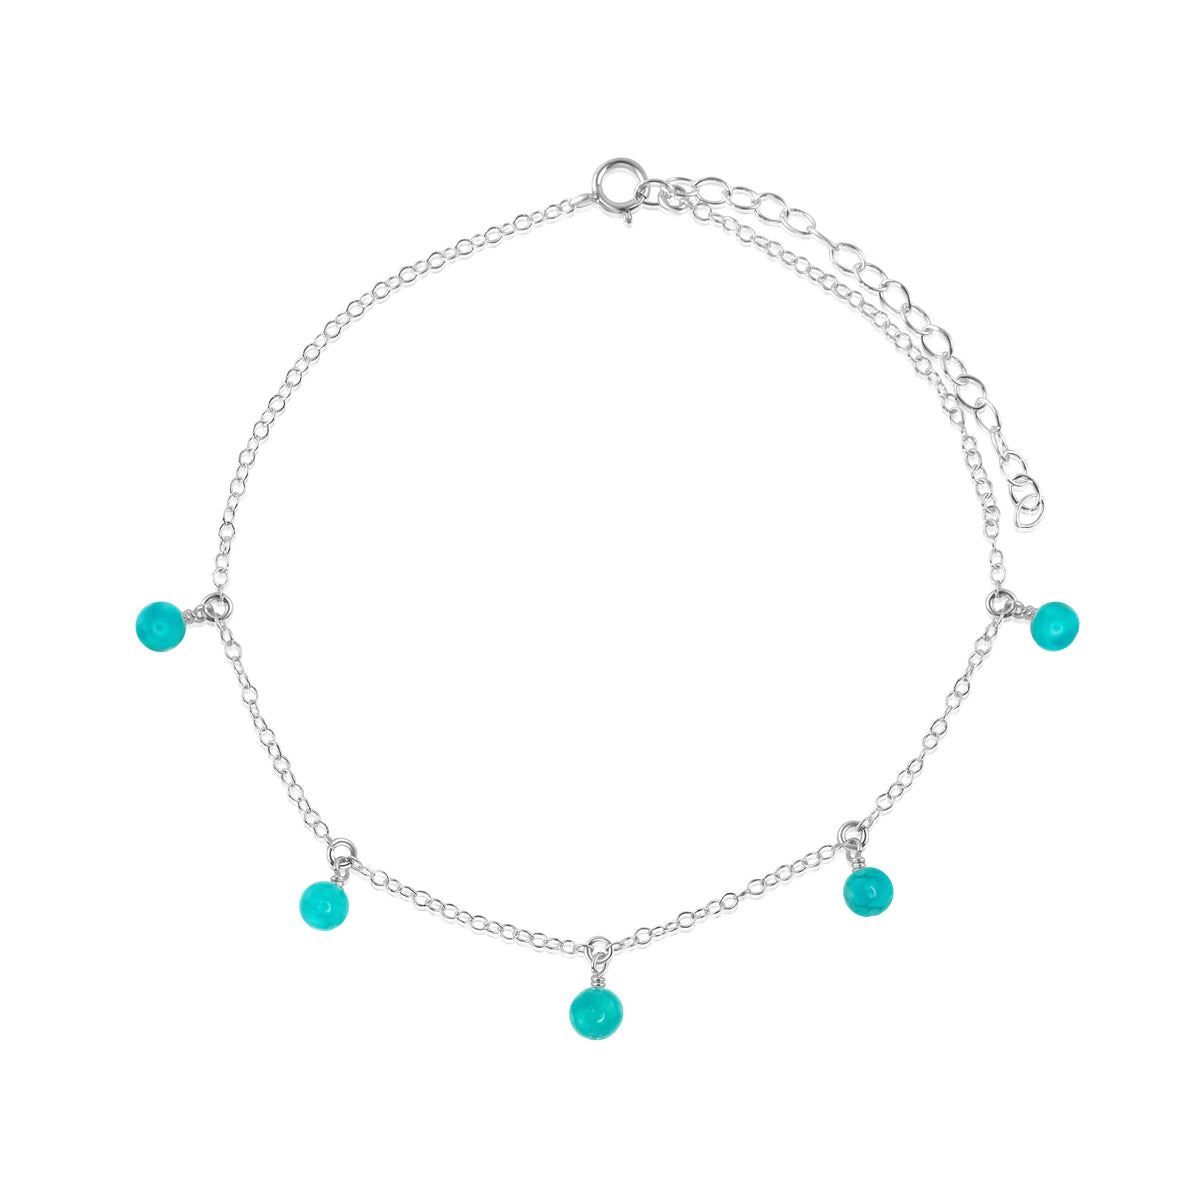 Bead Drop Anklet - Turquoise - Sterling Silver - Luna Tide Handmade Jewellery